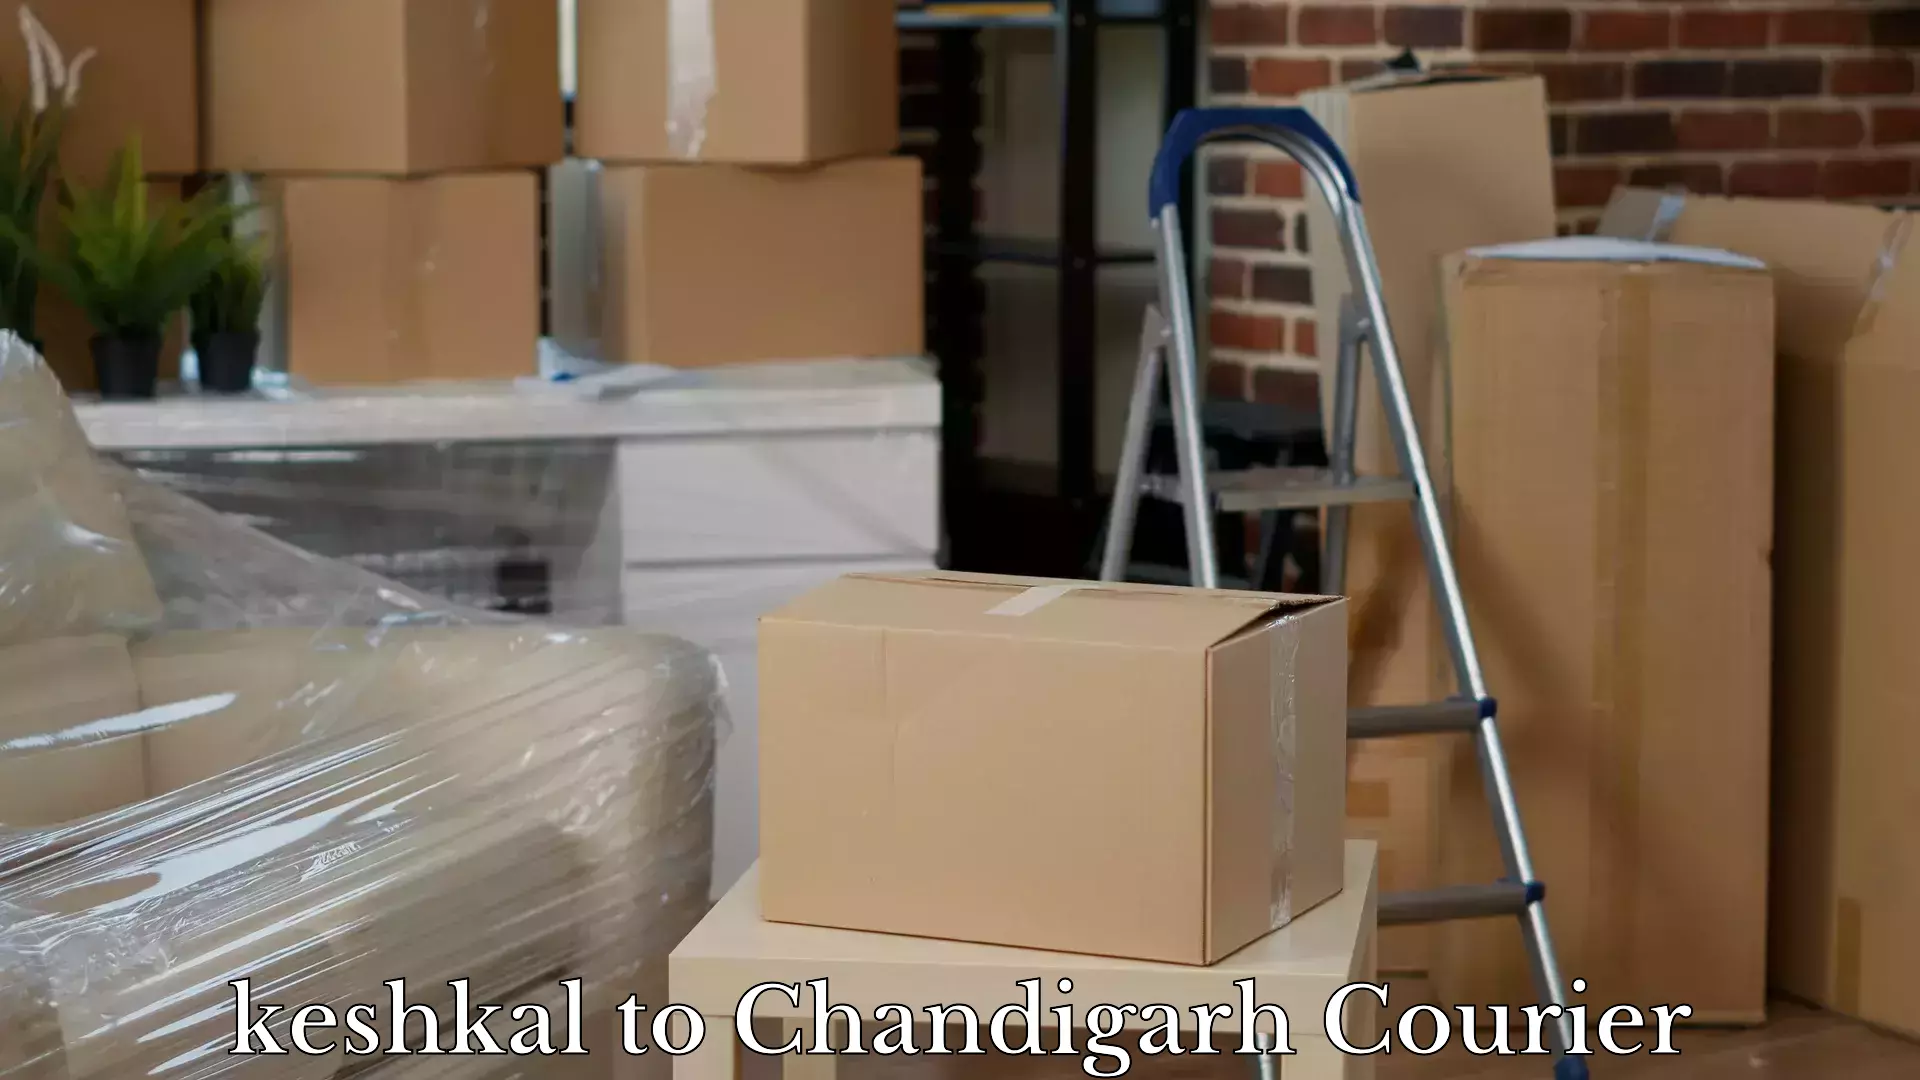 Luggage transport consulting keshkal to Chandigarh